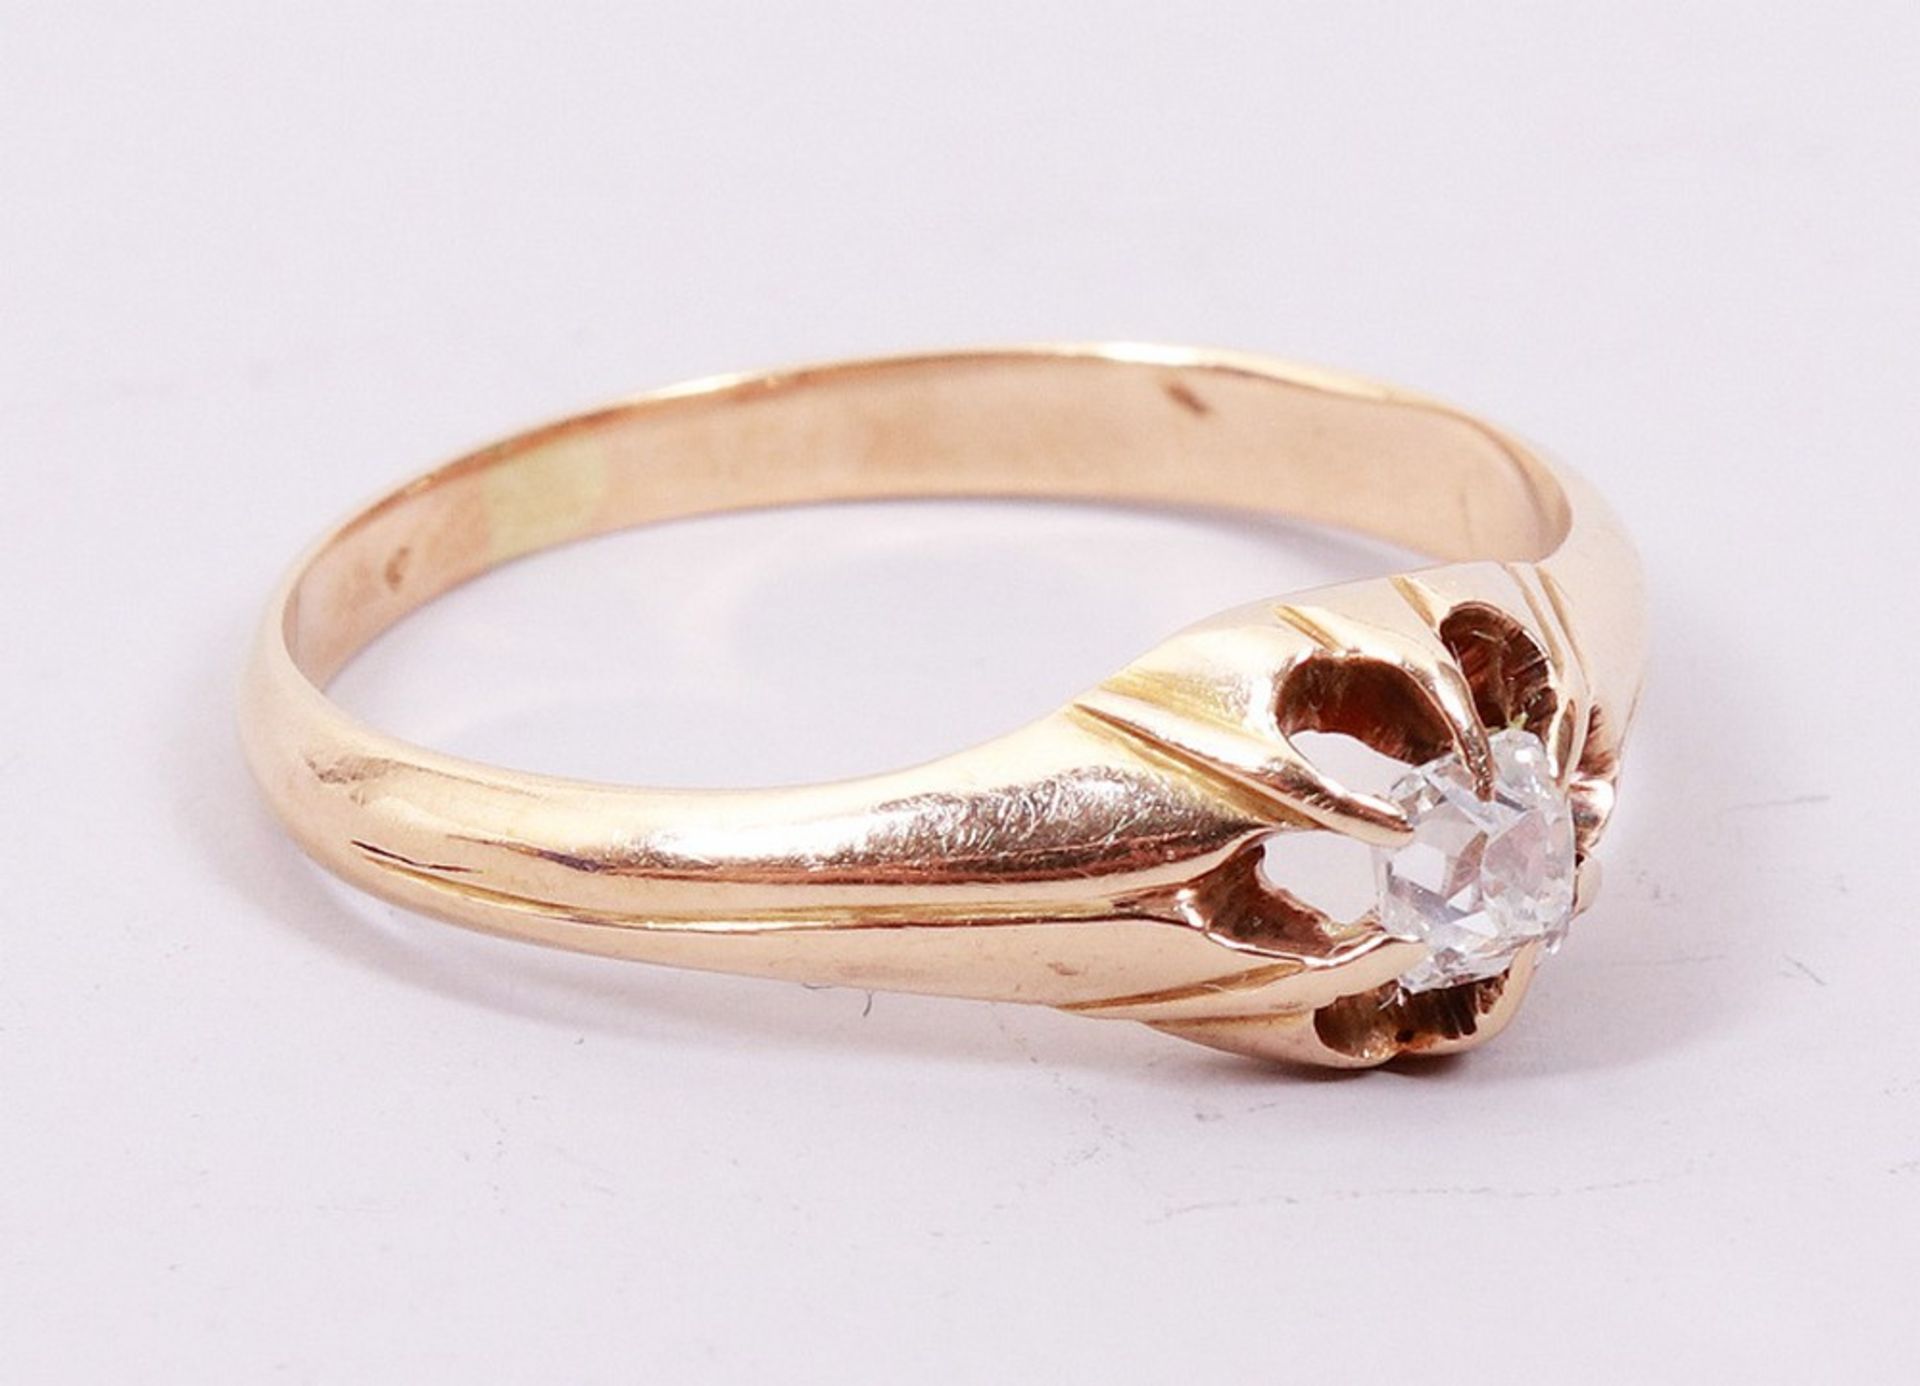 Solitaire ring - Image 4 of 5